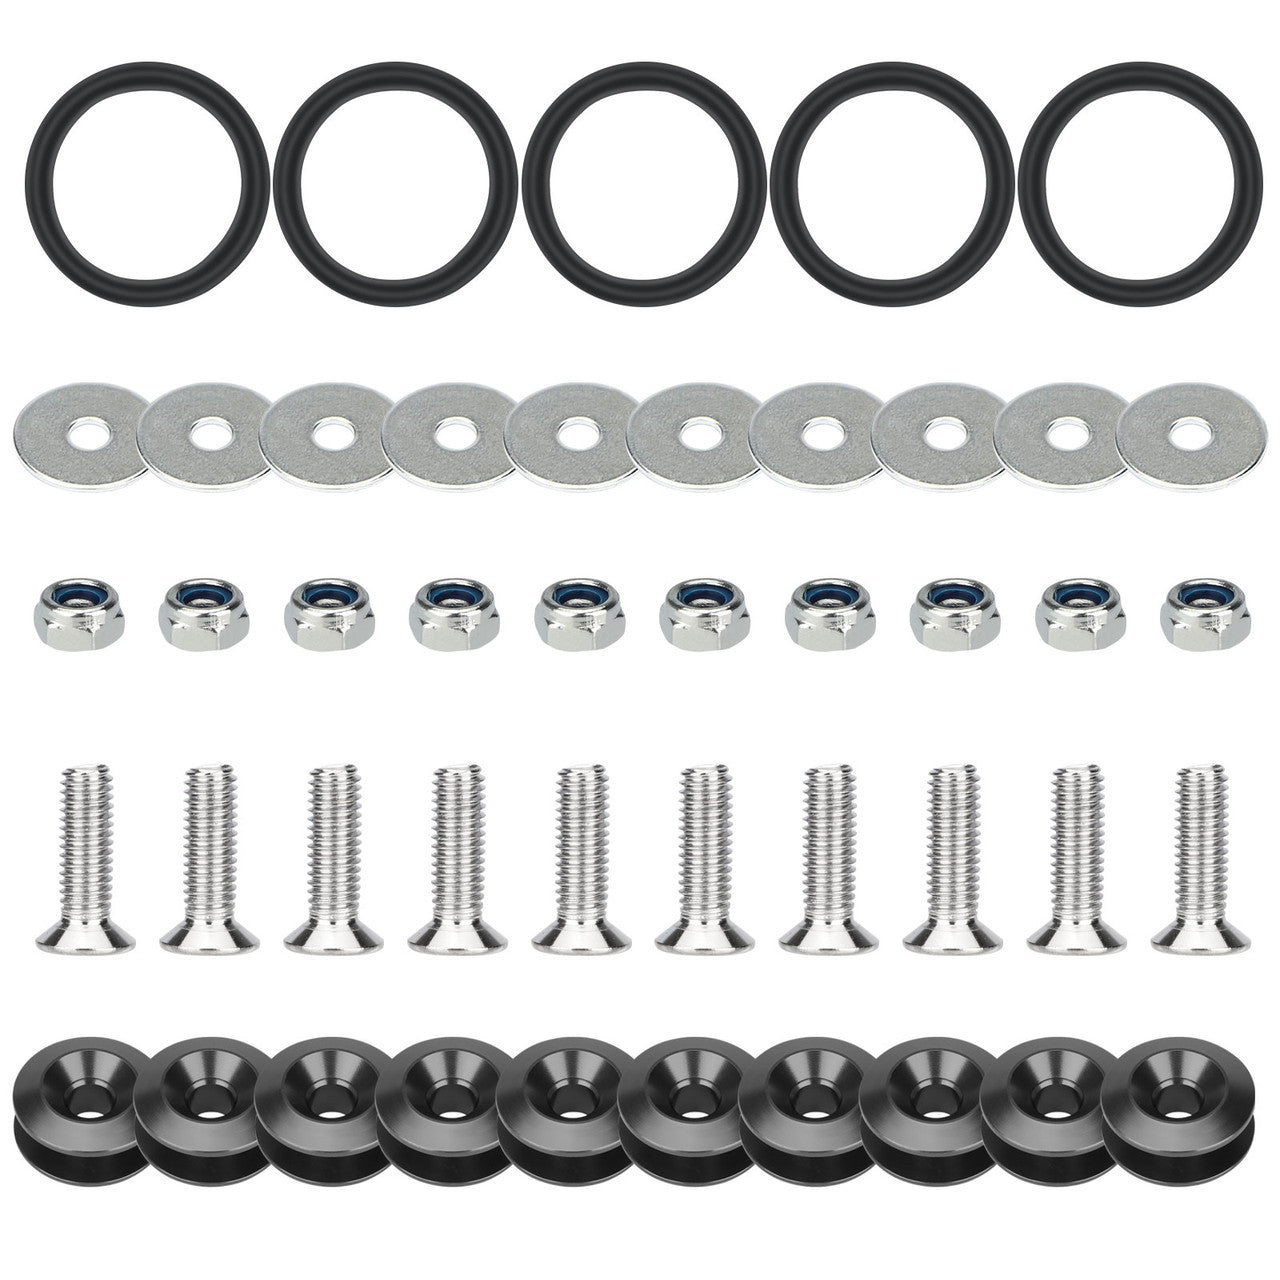 Bumper Quick Release Fasteners Kit, Universal Aluminum For Car Fender Fits for All Cars,Black,45Pcs